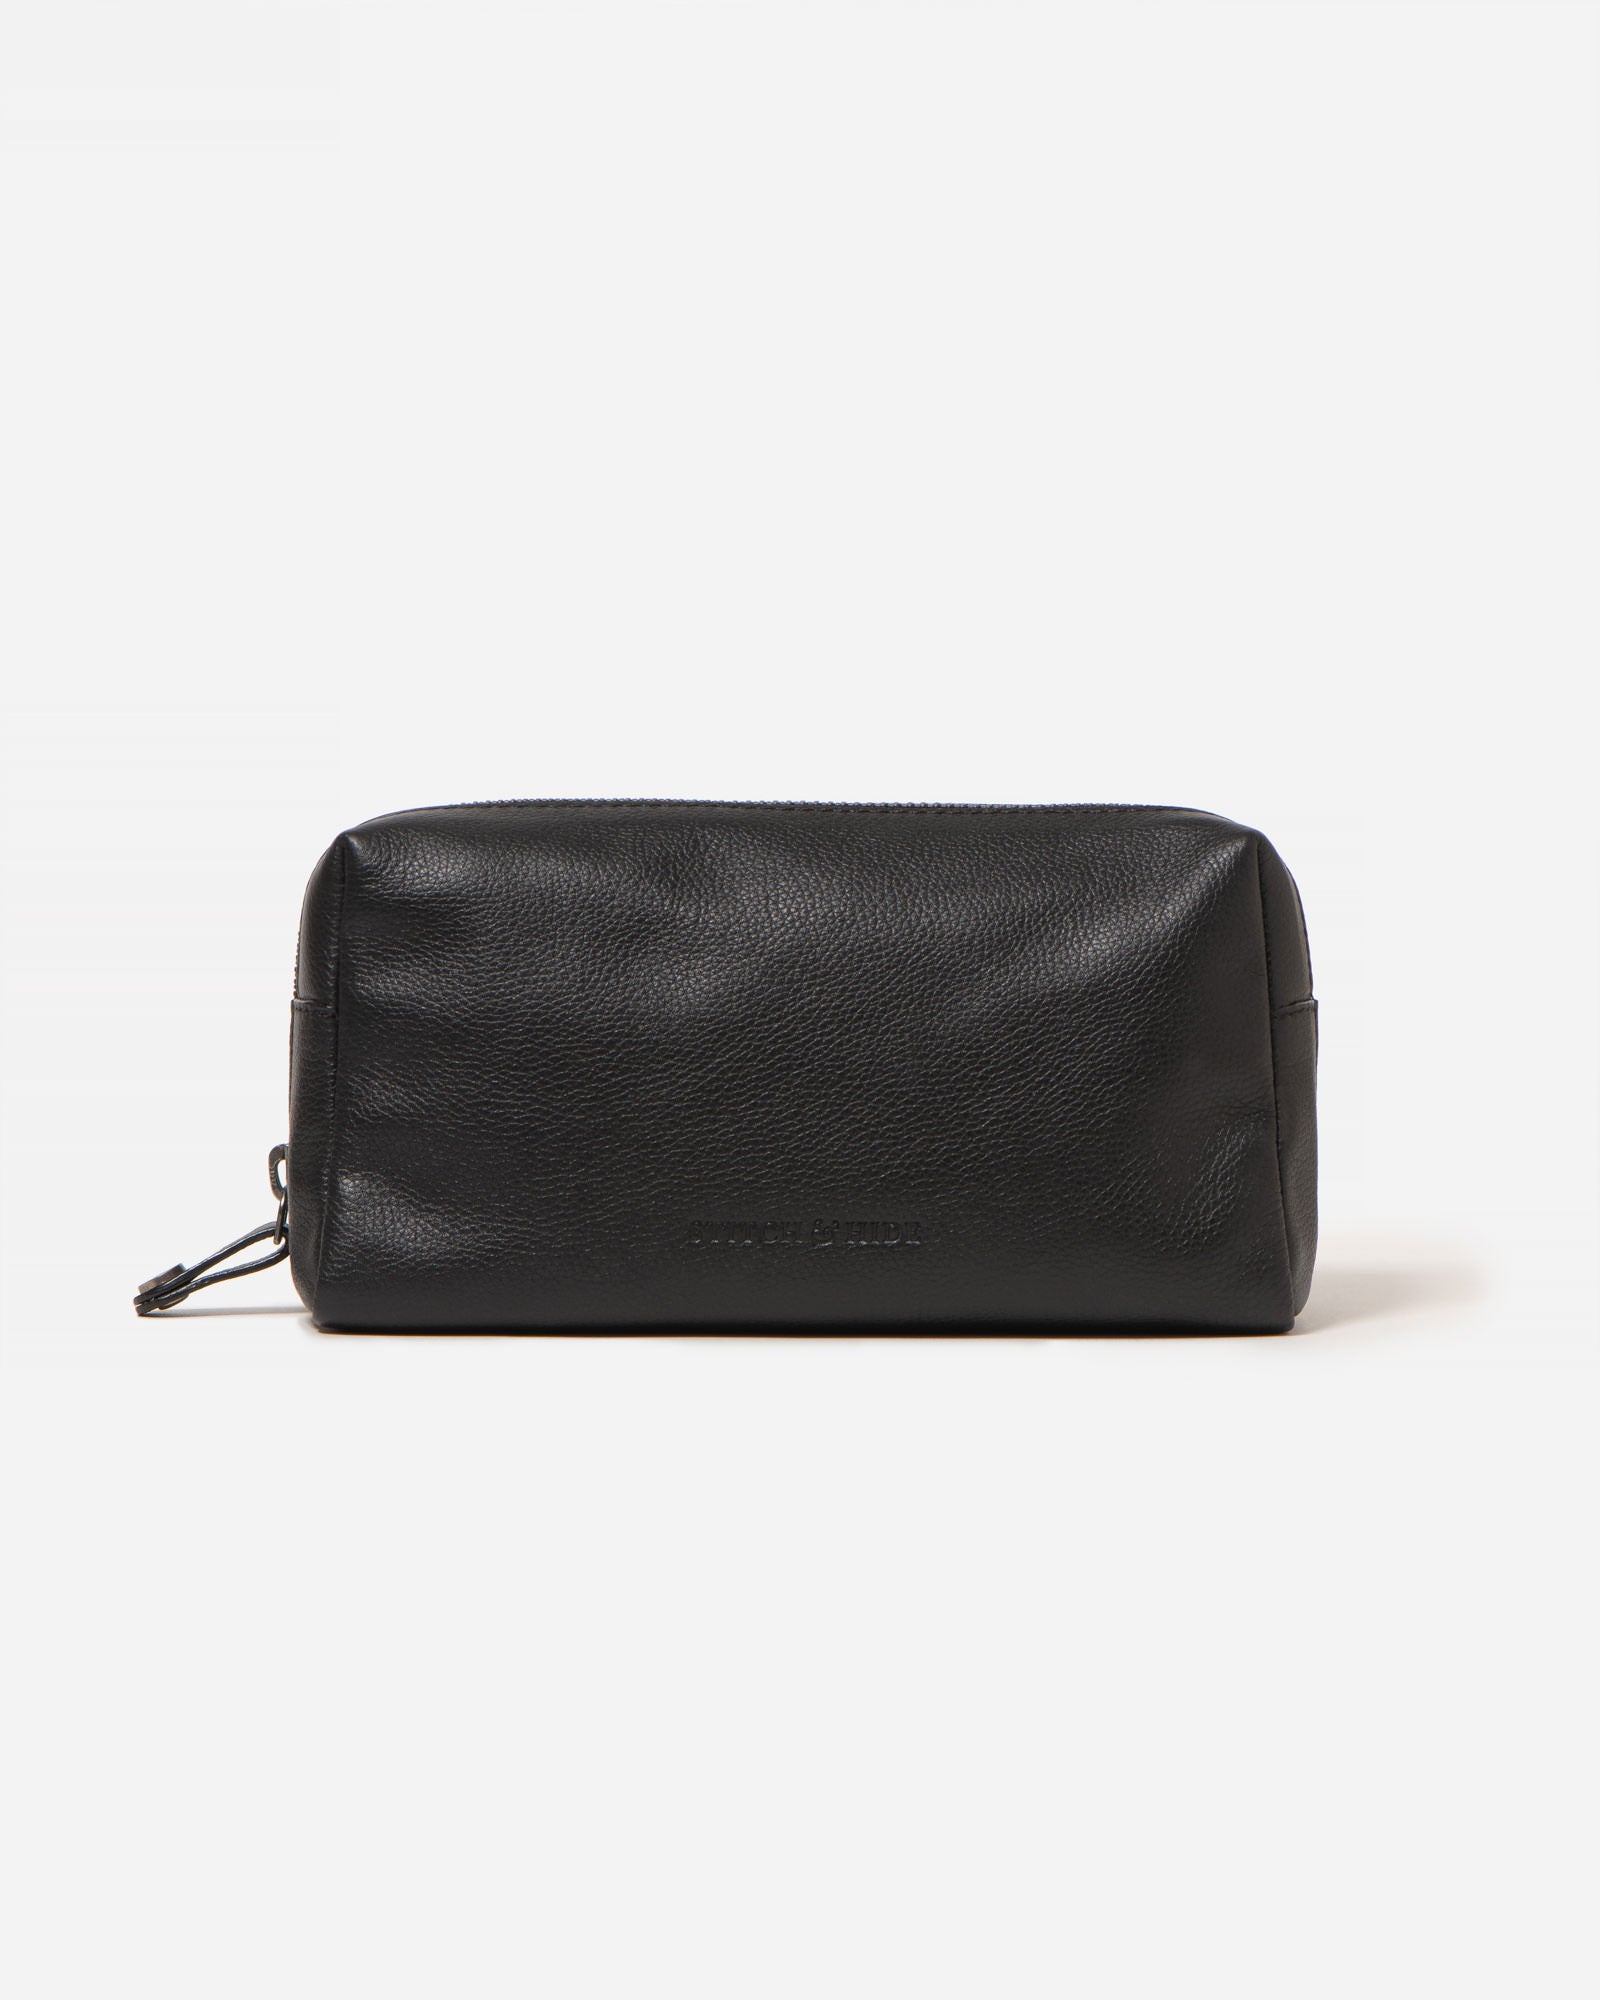 Cleo Makeup Bag - Leather Cosmetic Bag by Stitch & Hide